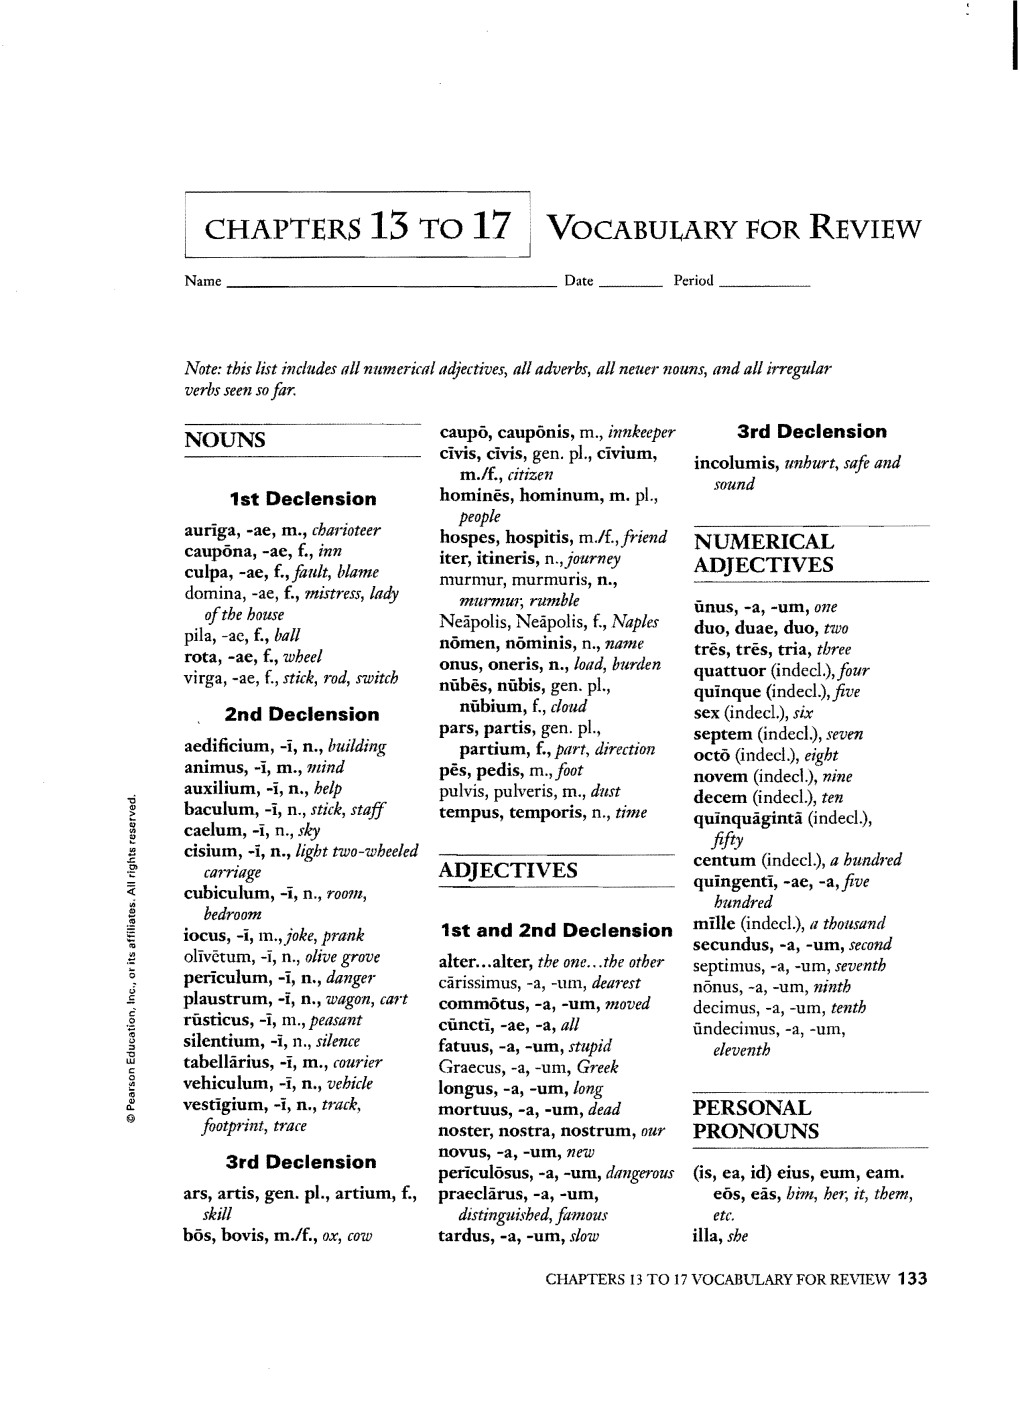 I Chapters 13 to 17 I Vocabulary for Review